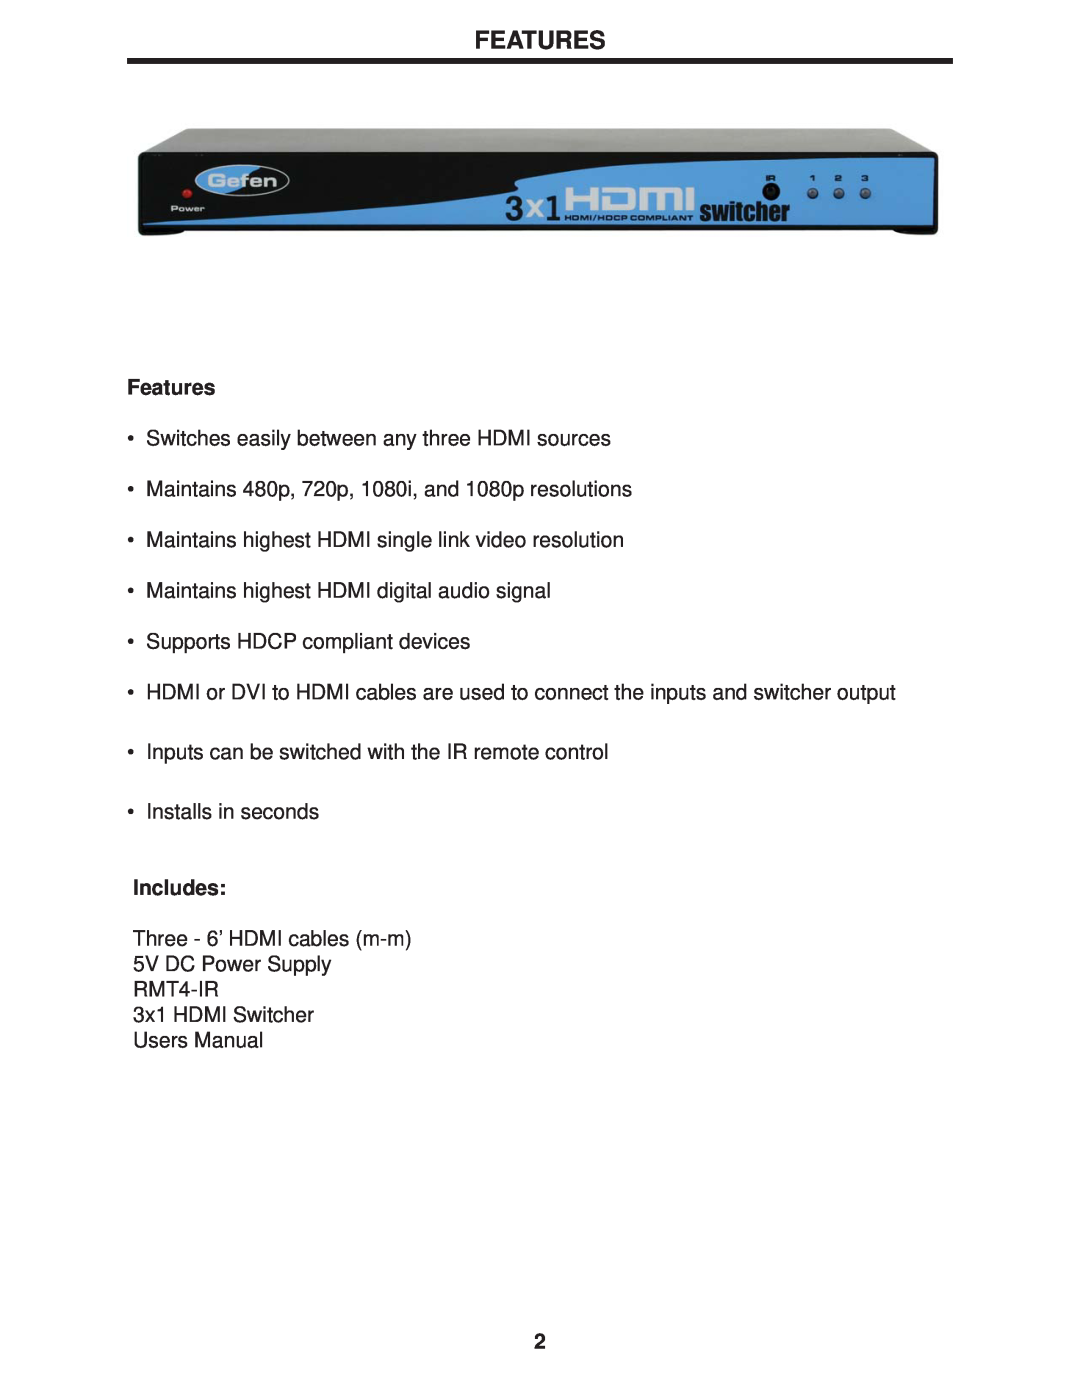 Gefen 3x1 HDMI Switcher user manual Features, Includes 